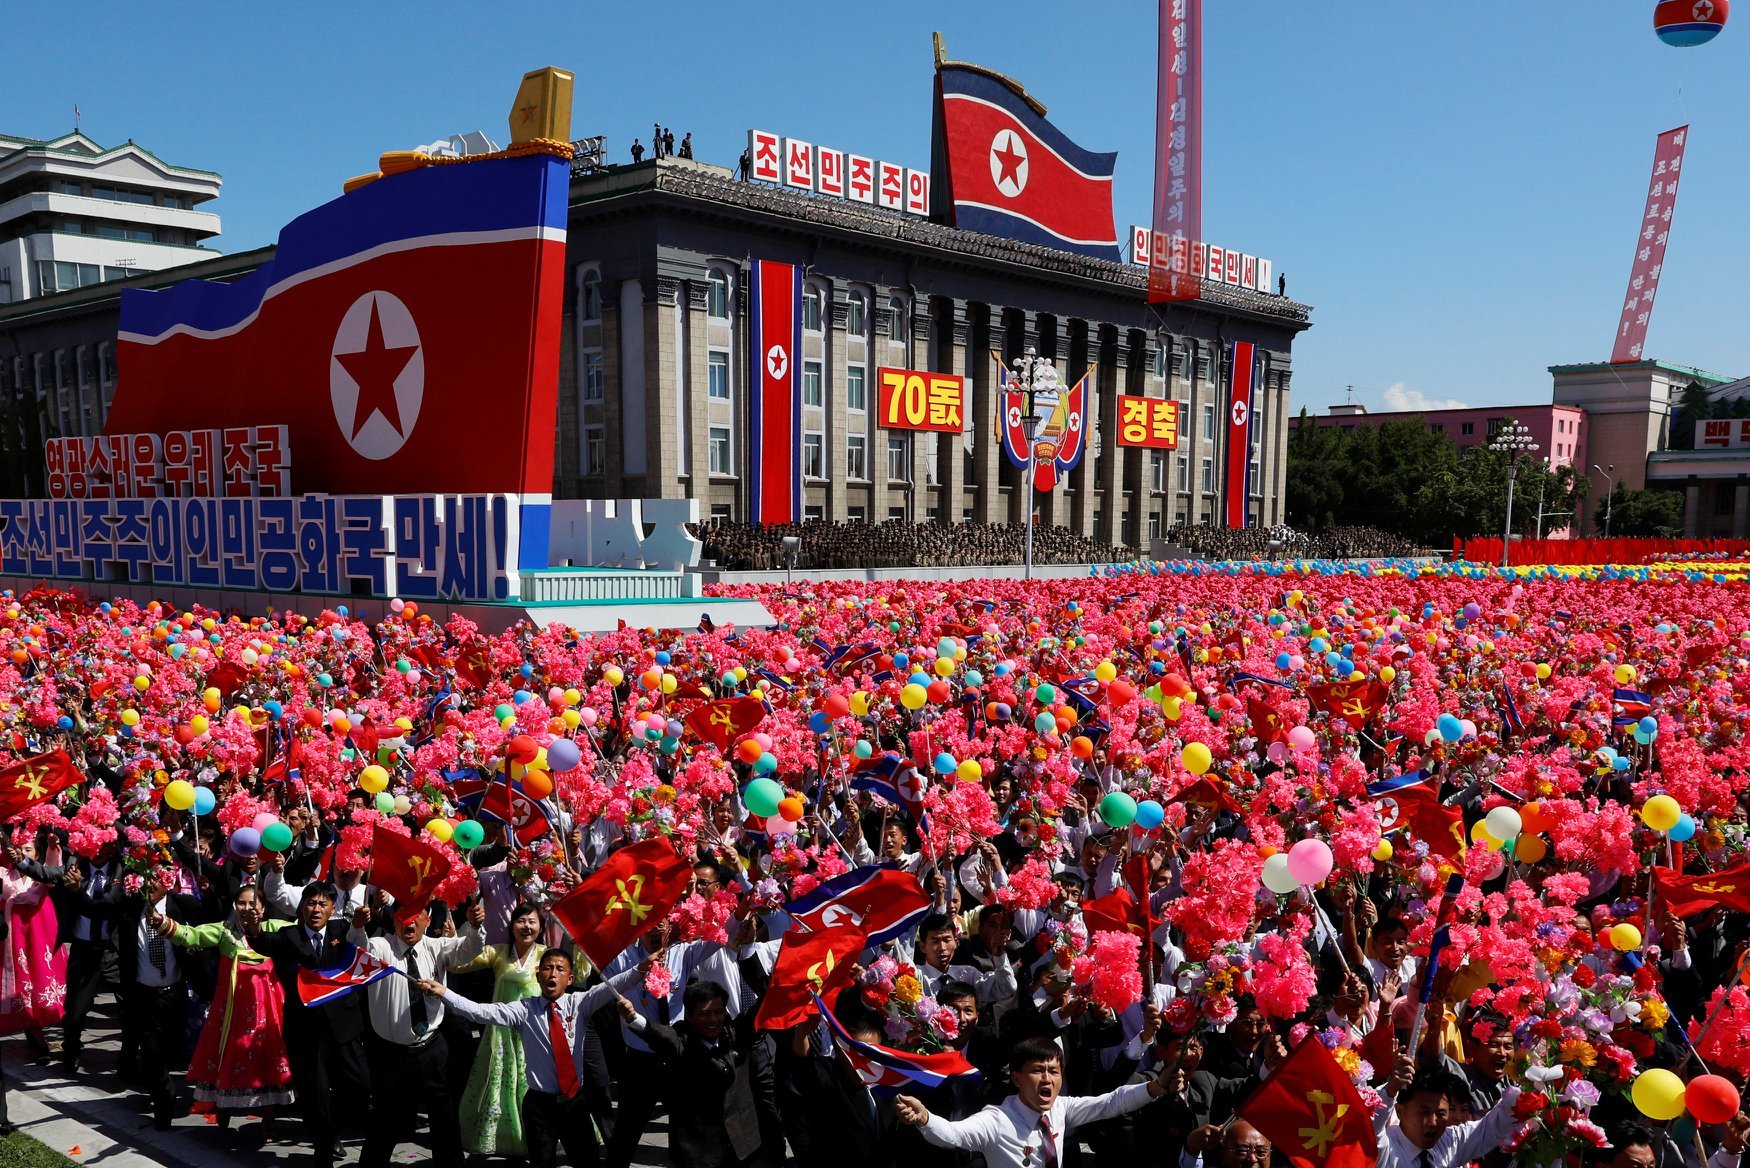 September 2018 People wave flowers and balloons during a military parade marking the 70th anniversary of North Korea's foundation in Pyongyang..jpg